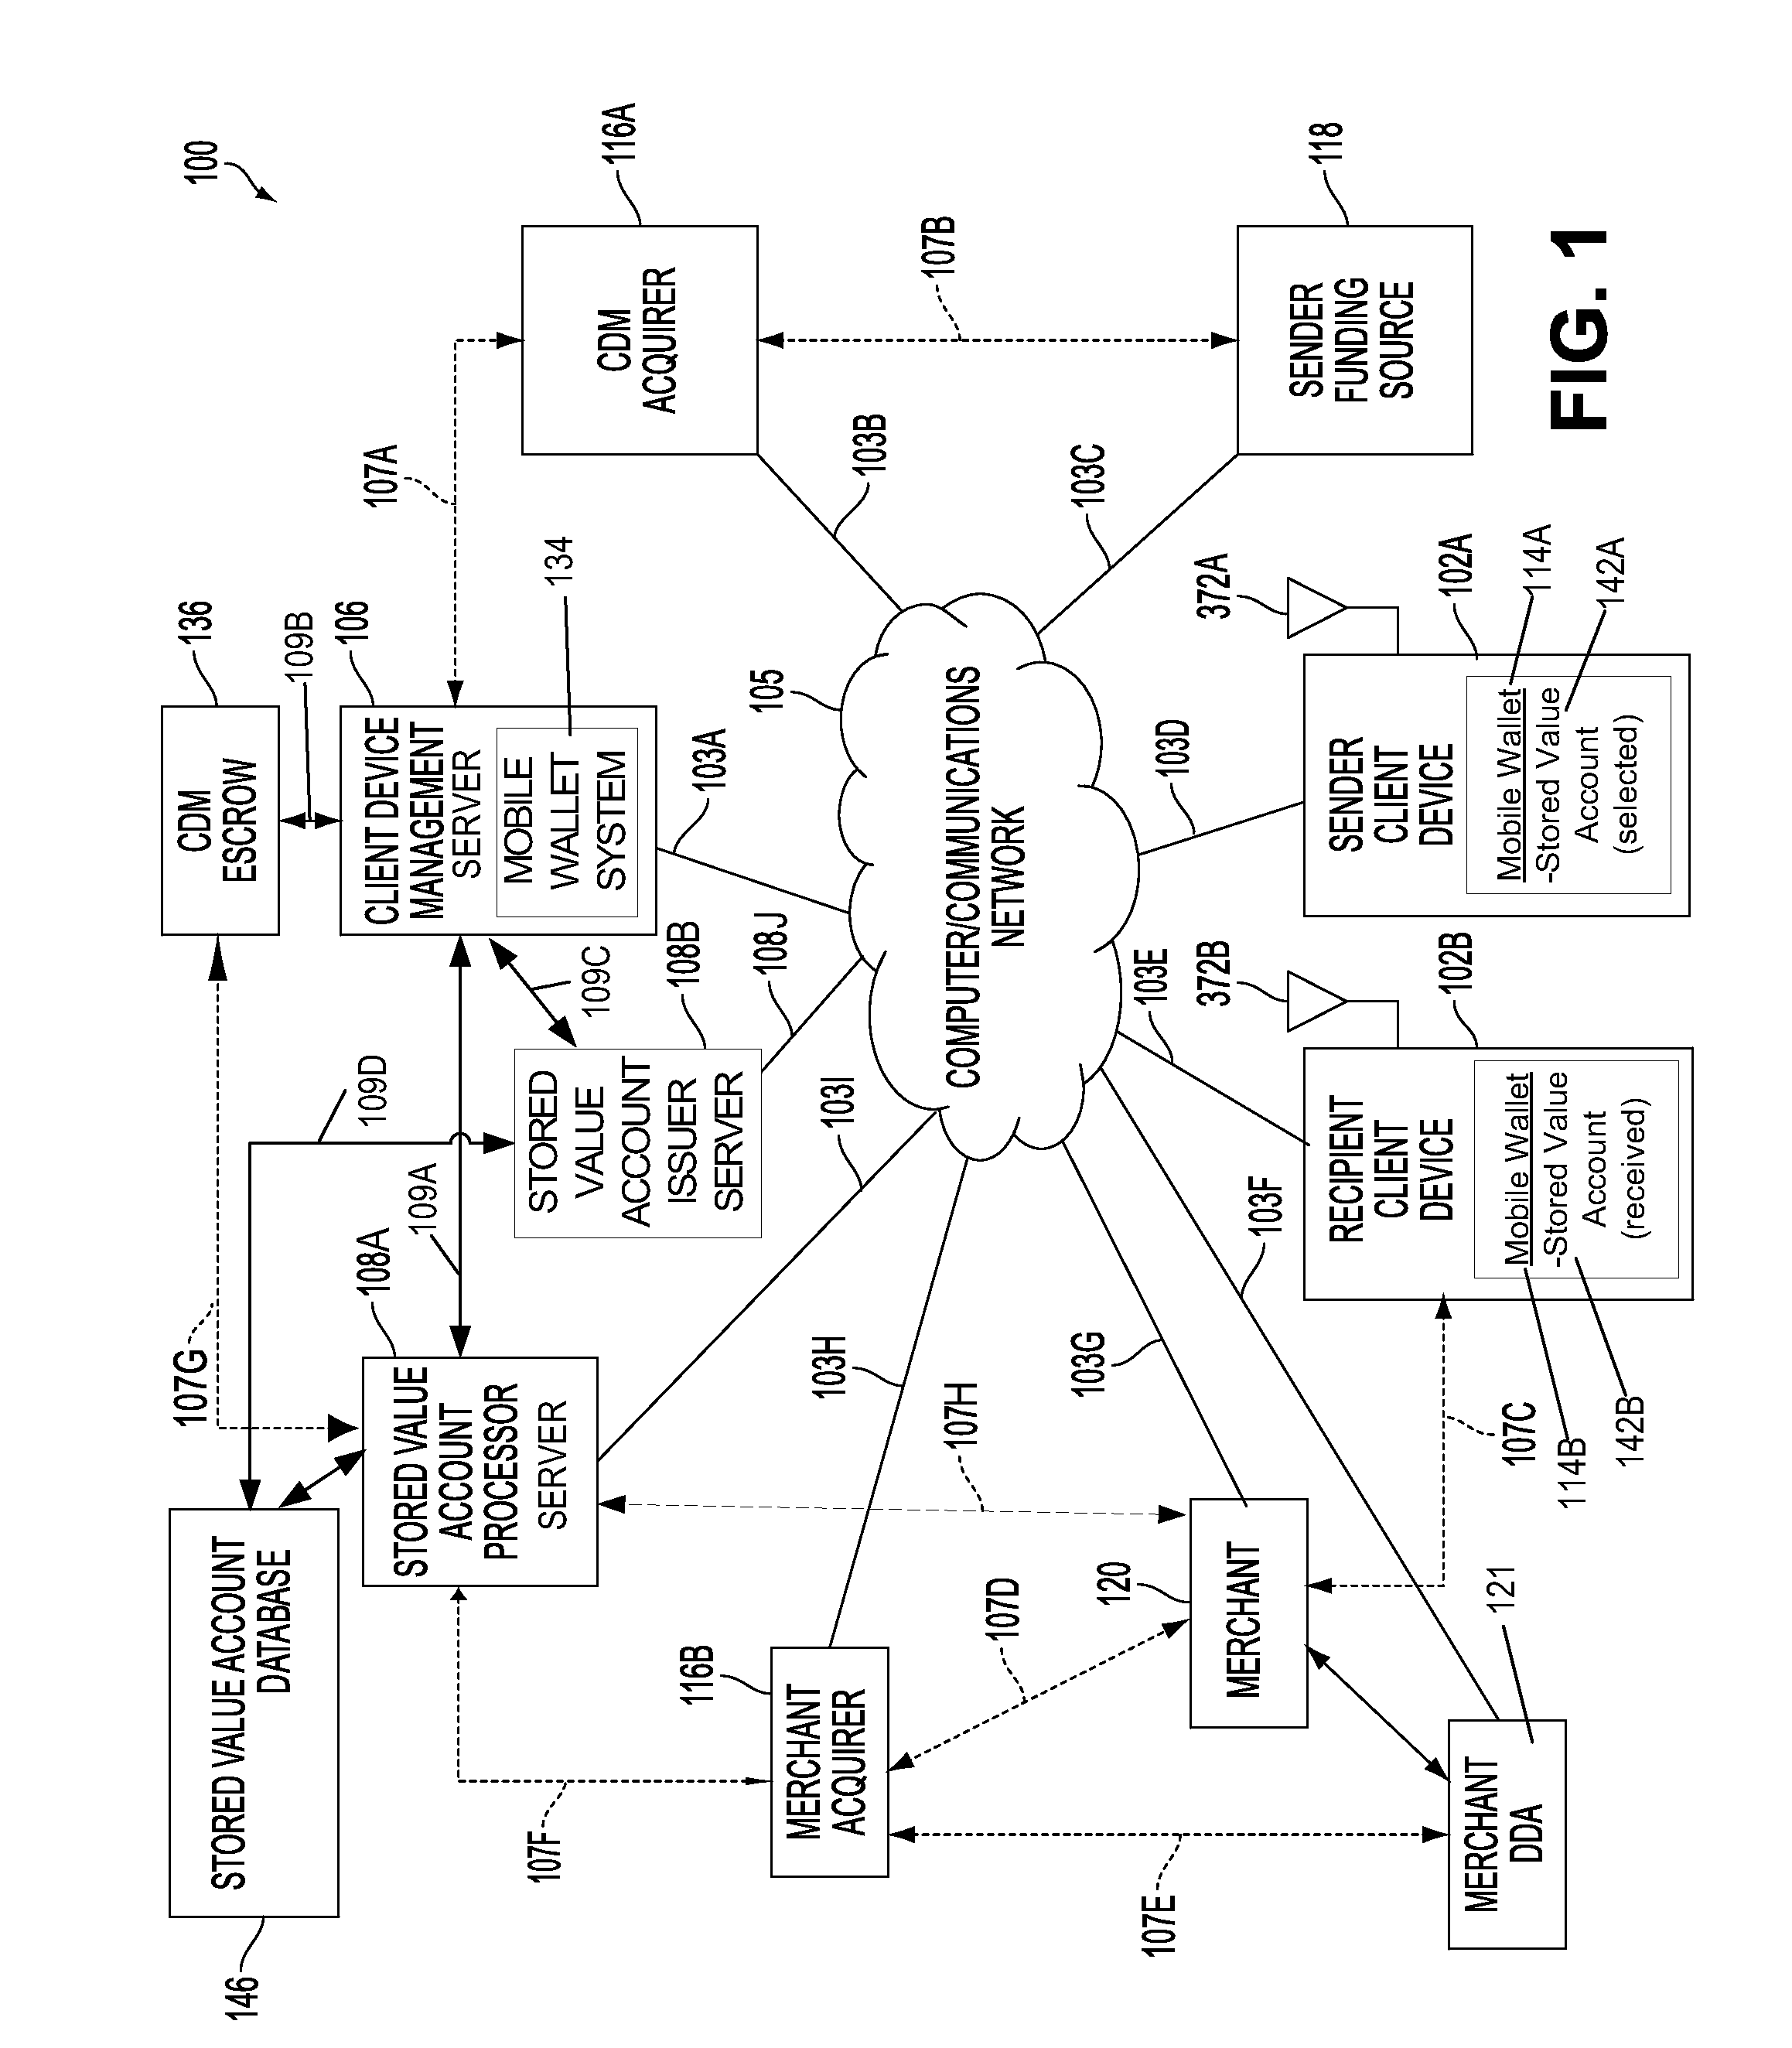 System and method for creating and managing a stored value account associated with a client unique identifier